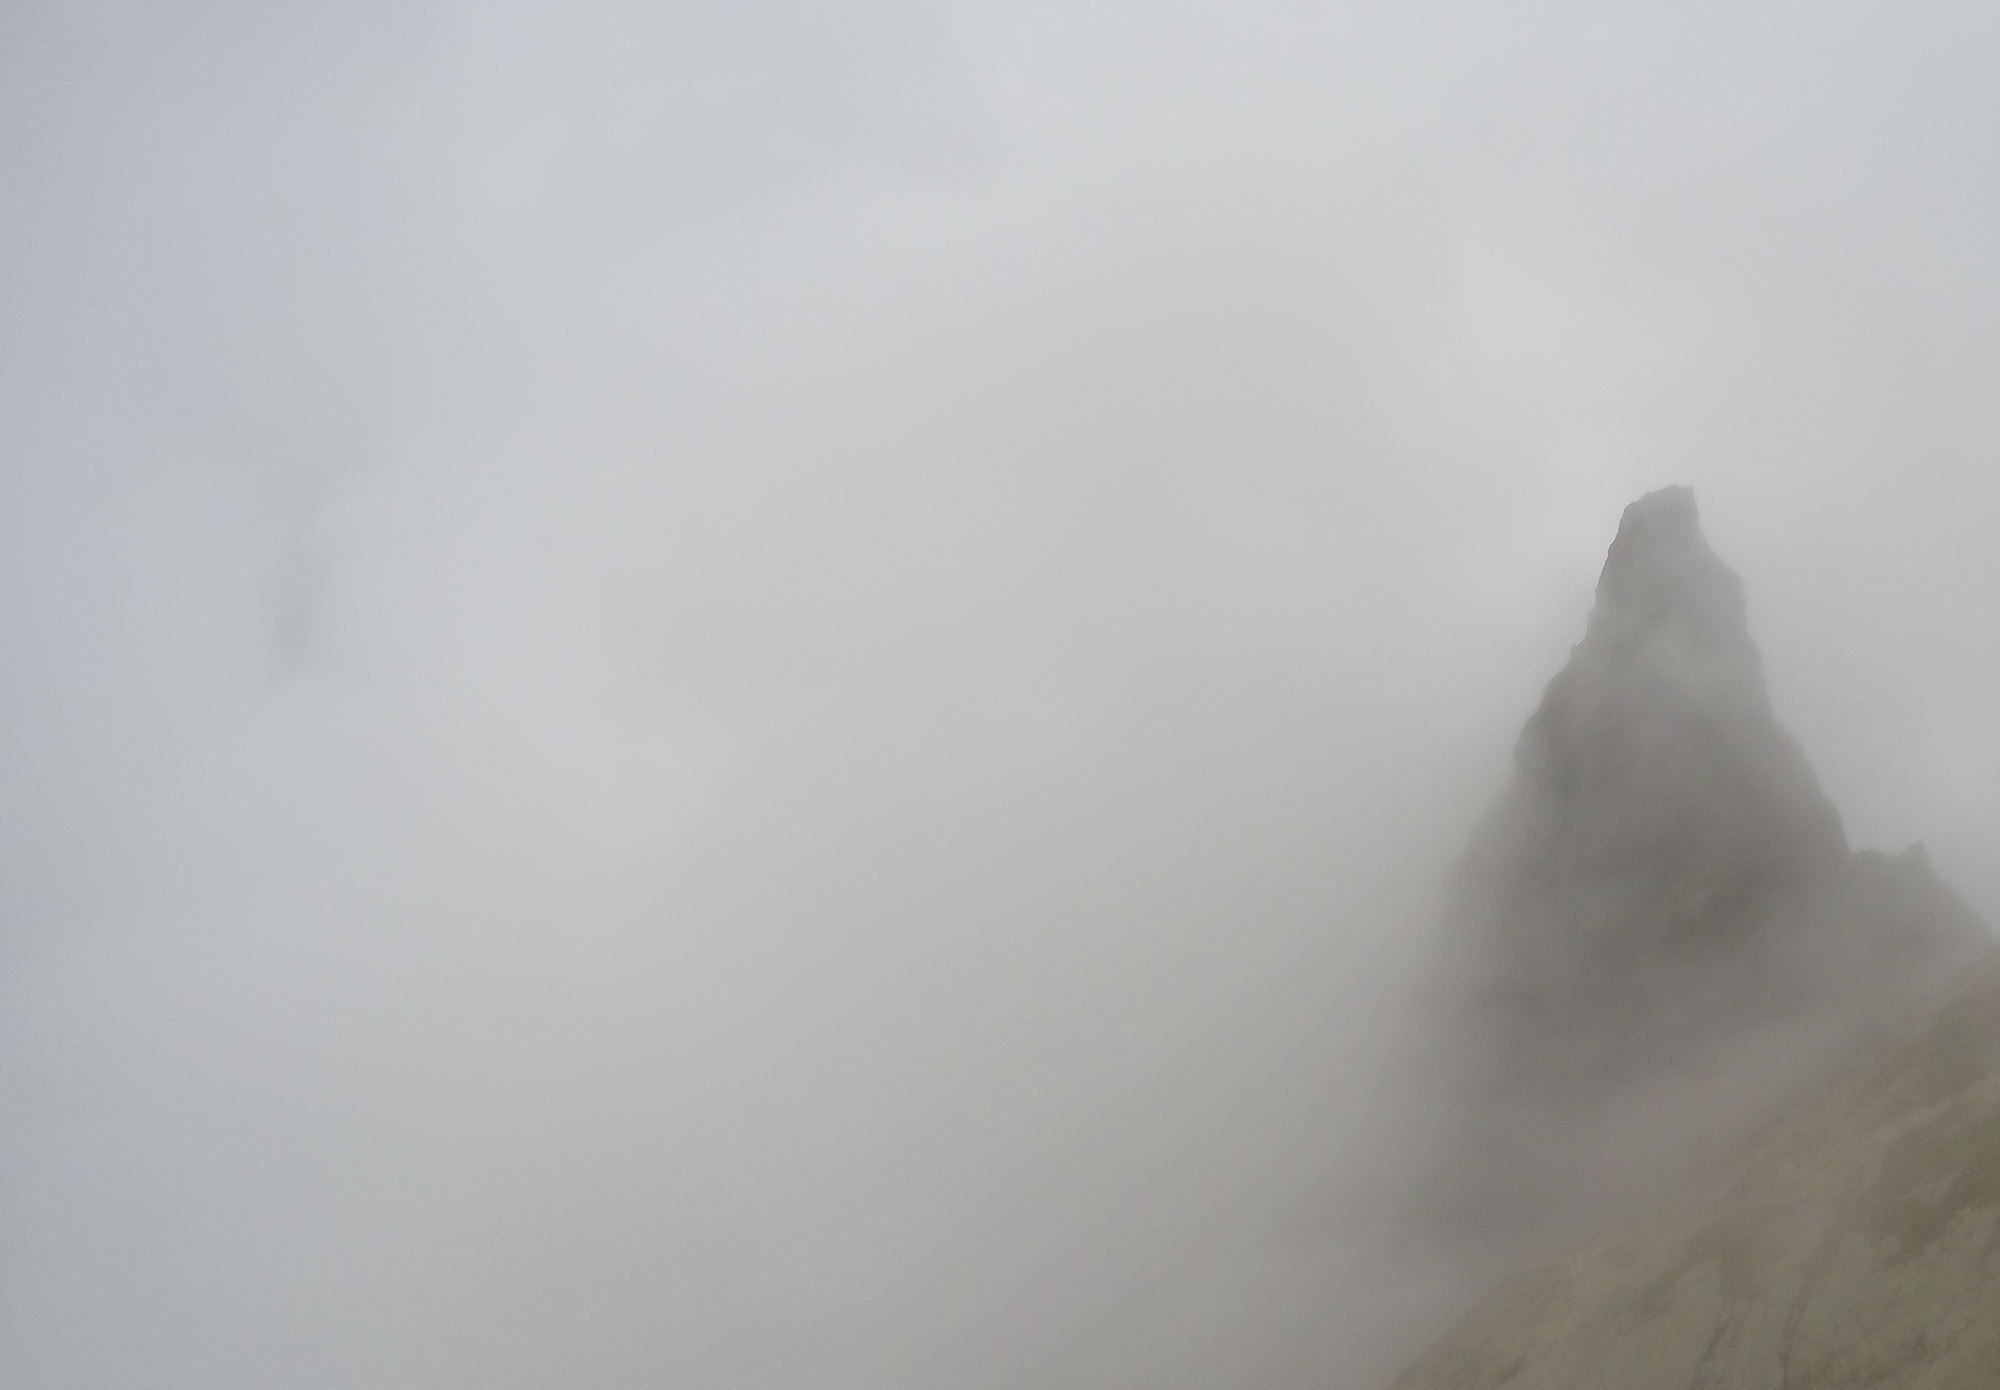 The Aiguille de L'Index emerges briefly from the clouds - spooky!